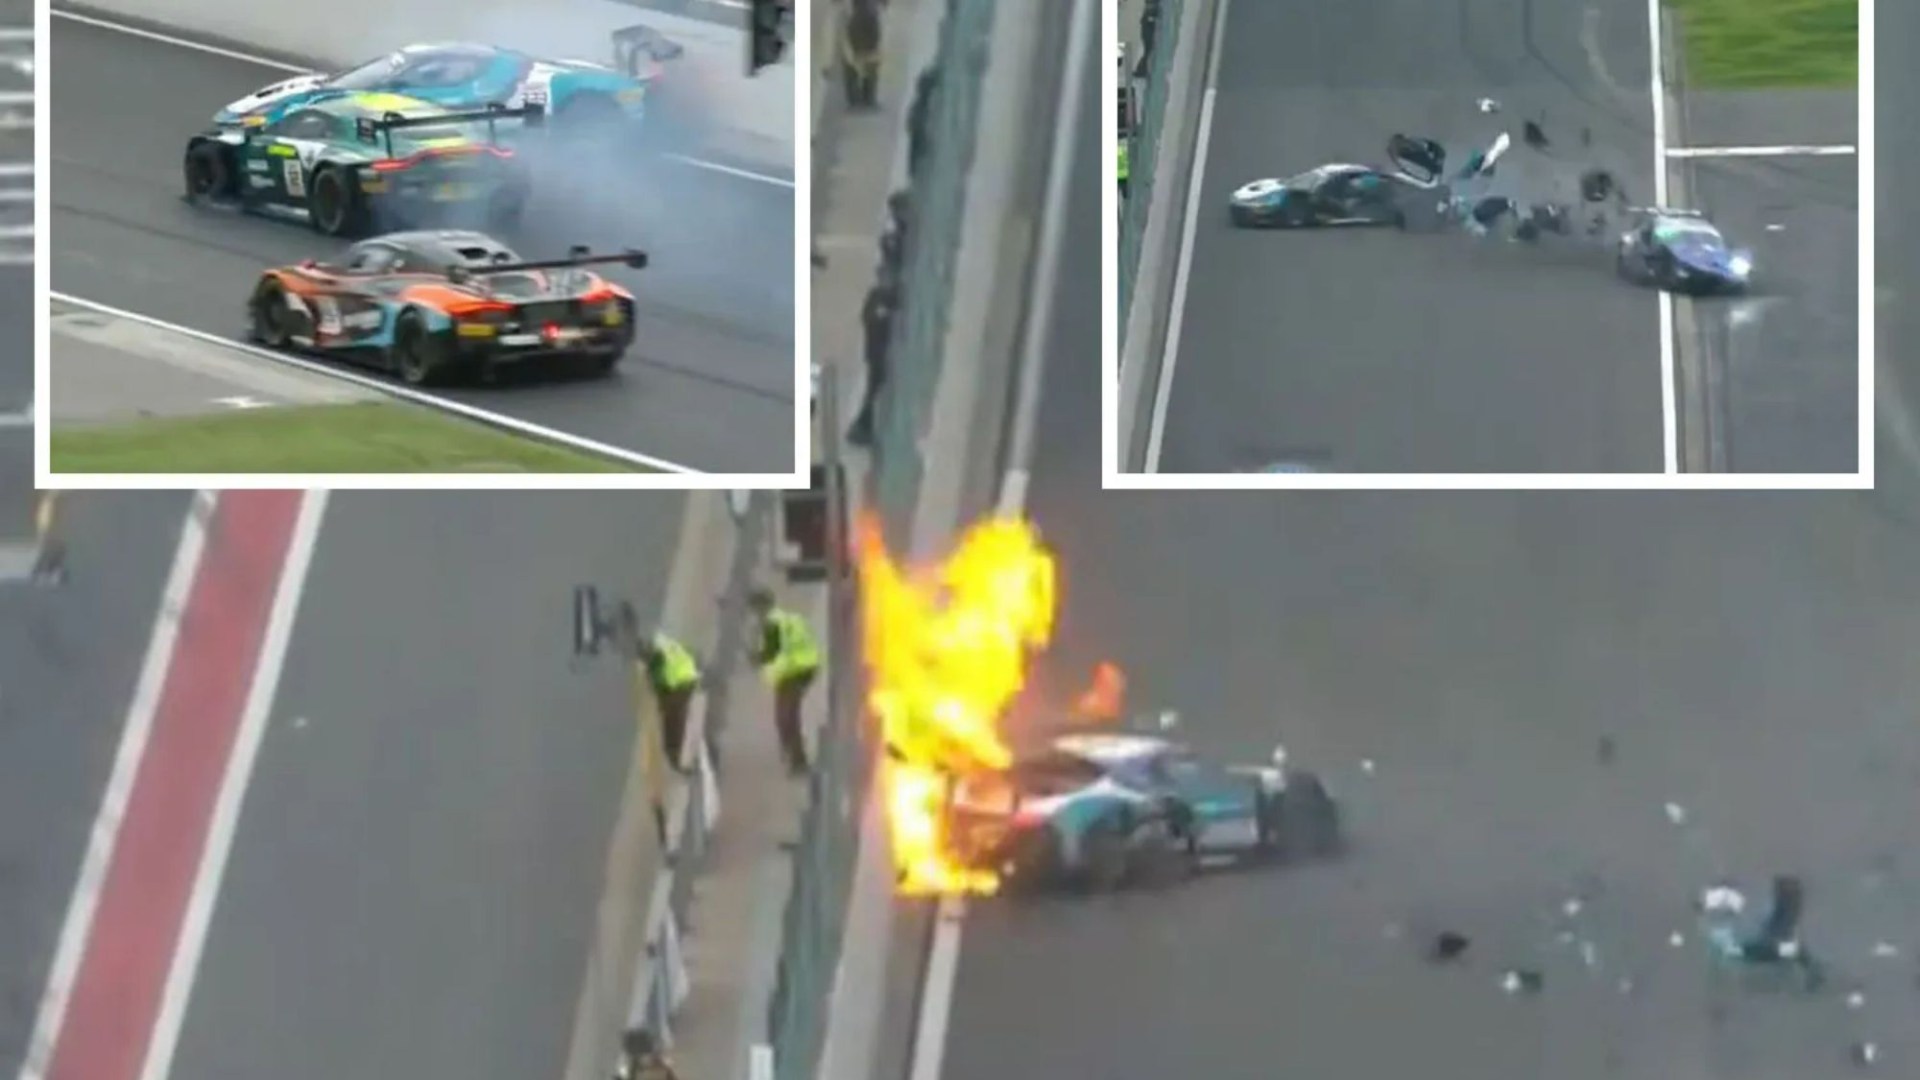 Horror crash sees race car burst into flame after rival smashes into him at 125mph and stewards are forced to flee